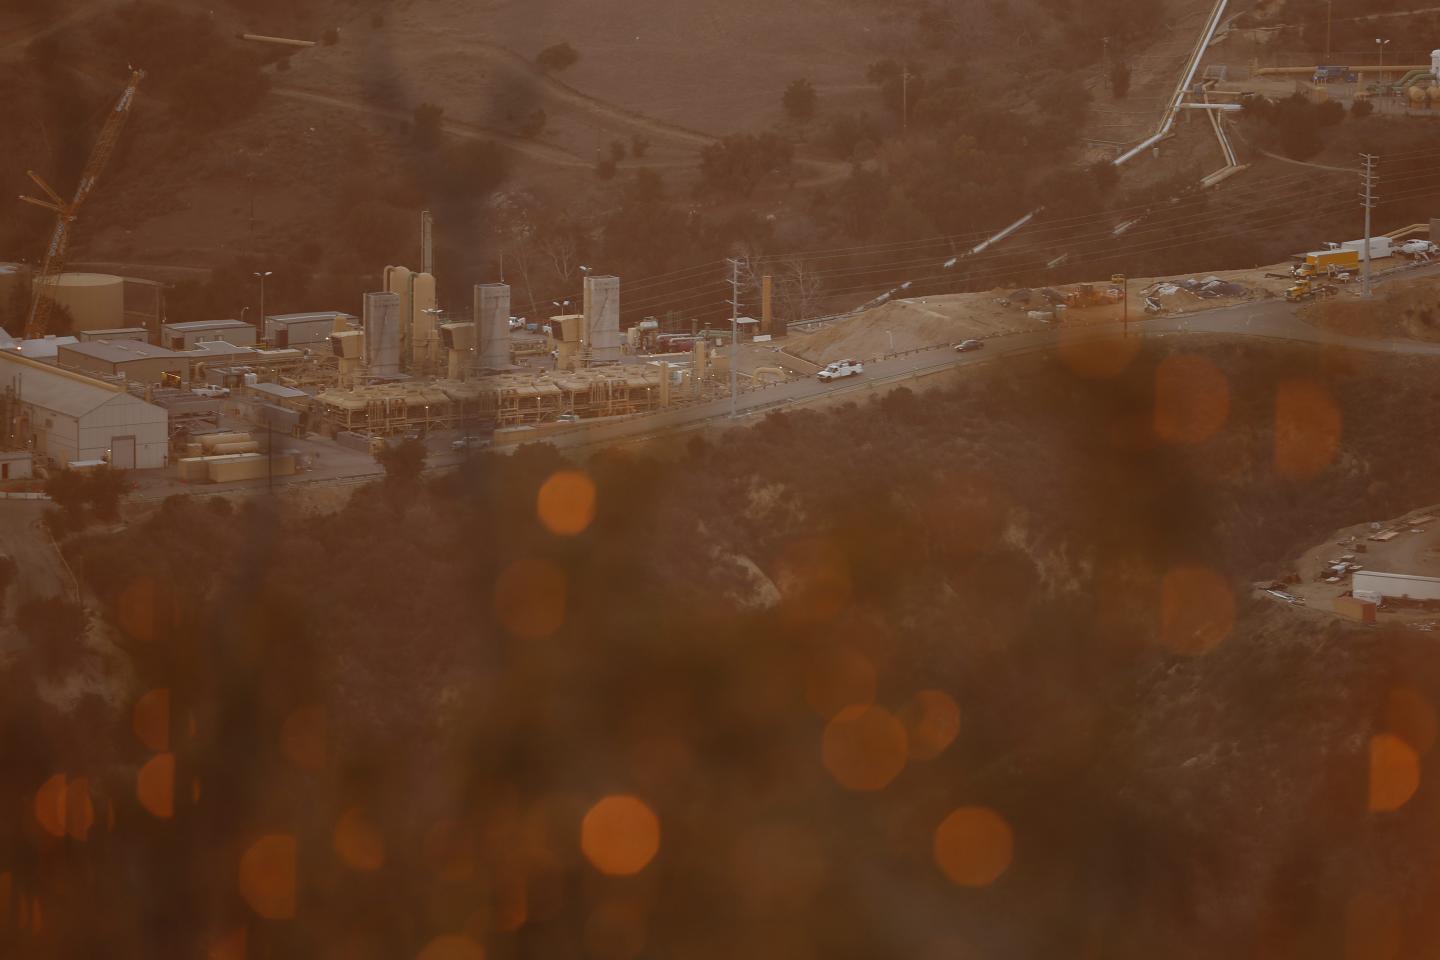 Vehicles drive past machinery at the SoCalGas Aliso Canyon Storage Facility at sunset on Dec. 30, 2015. The company has relocated residents who have complained about the smell of gas, as it promised to plug the leak within months.